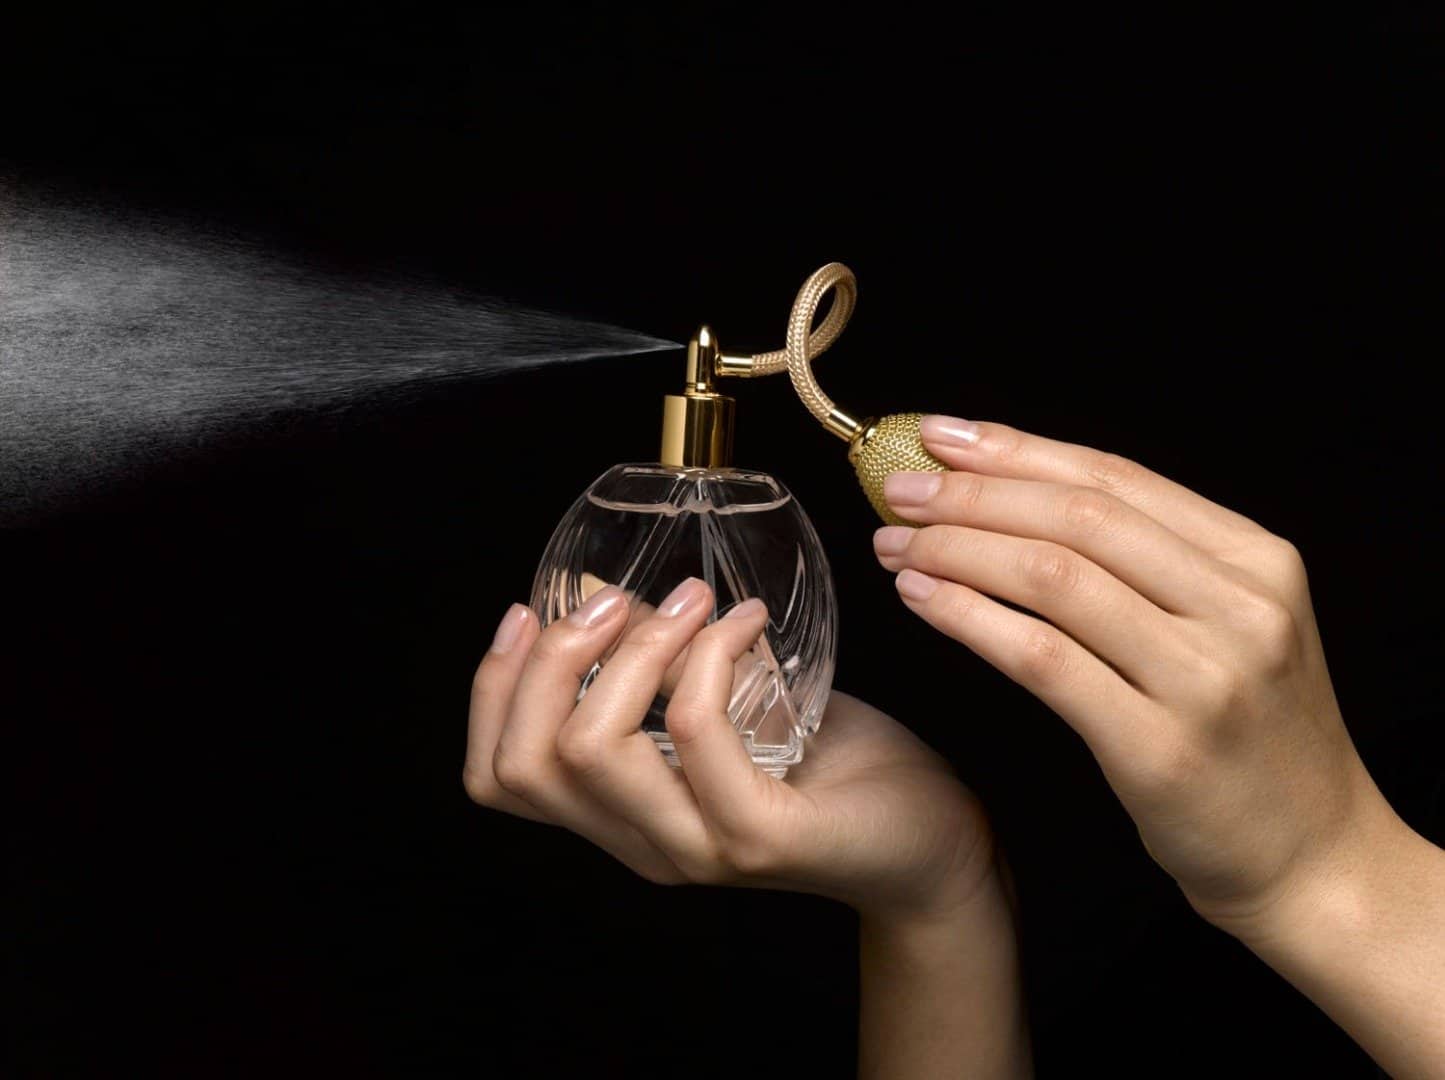 This Company Will Turn Your Dead Loved Ones Into A Perfume